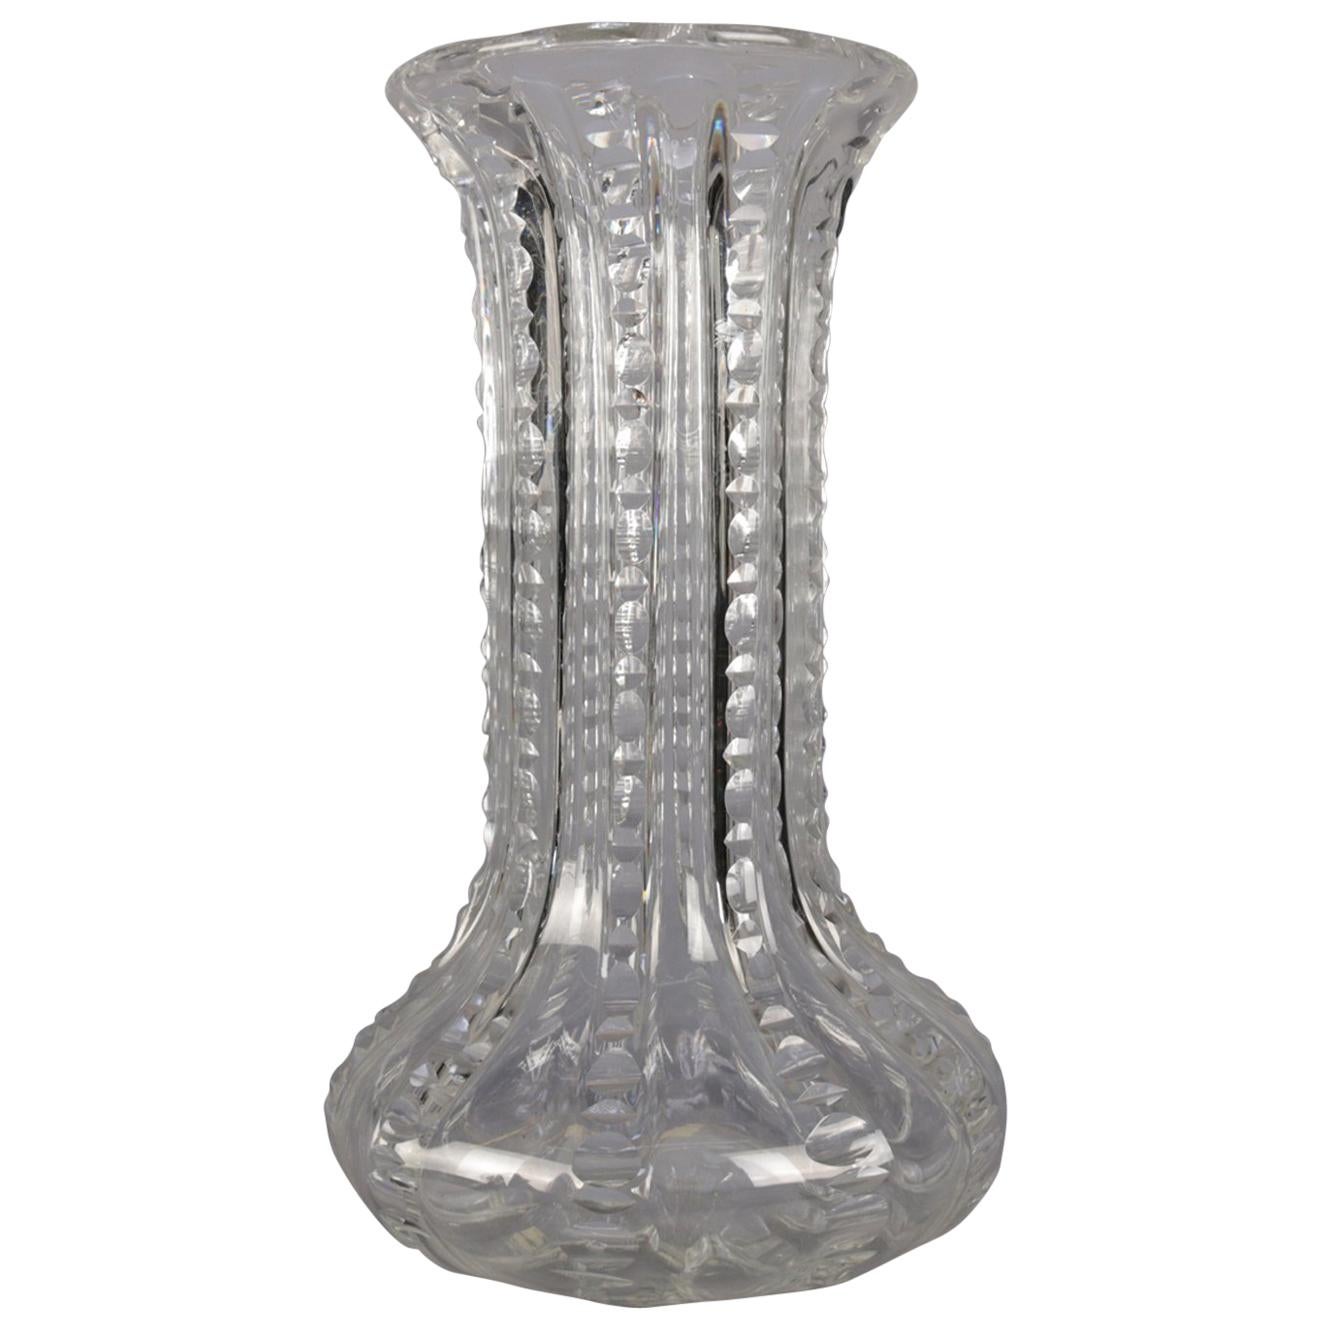 Antique Oversized Hawkes School Ribbed Glass Flower Vase, circa 1900